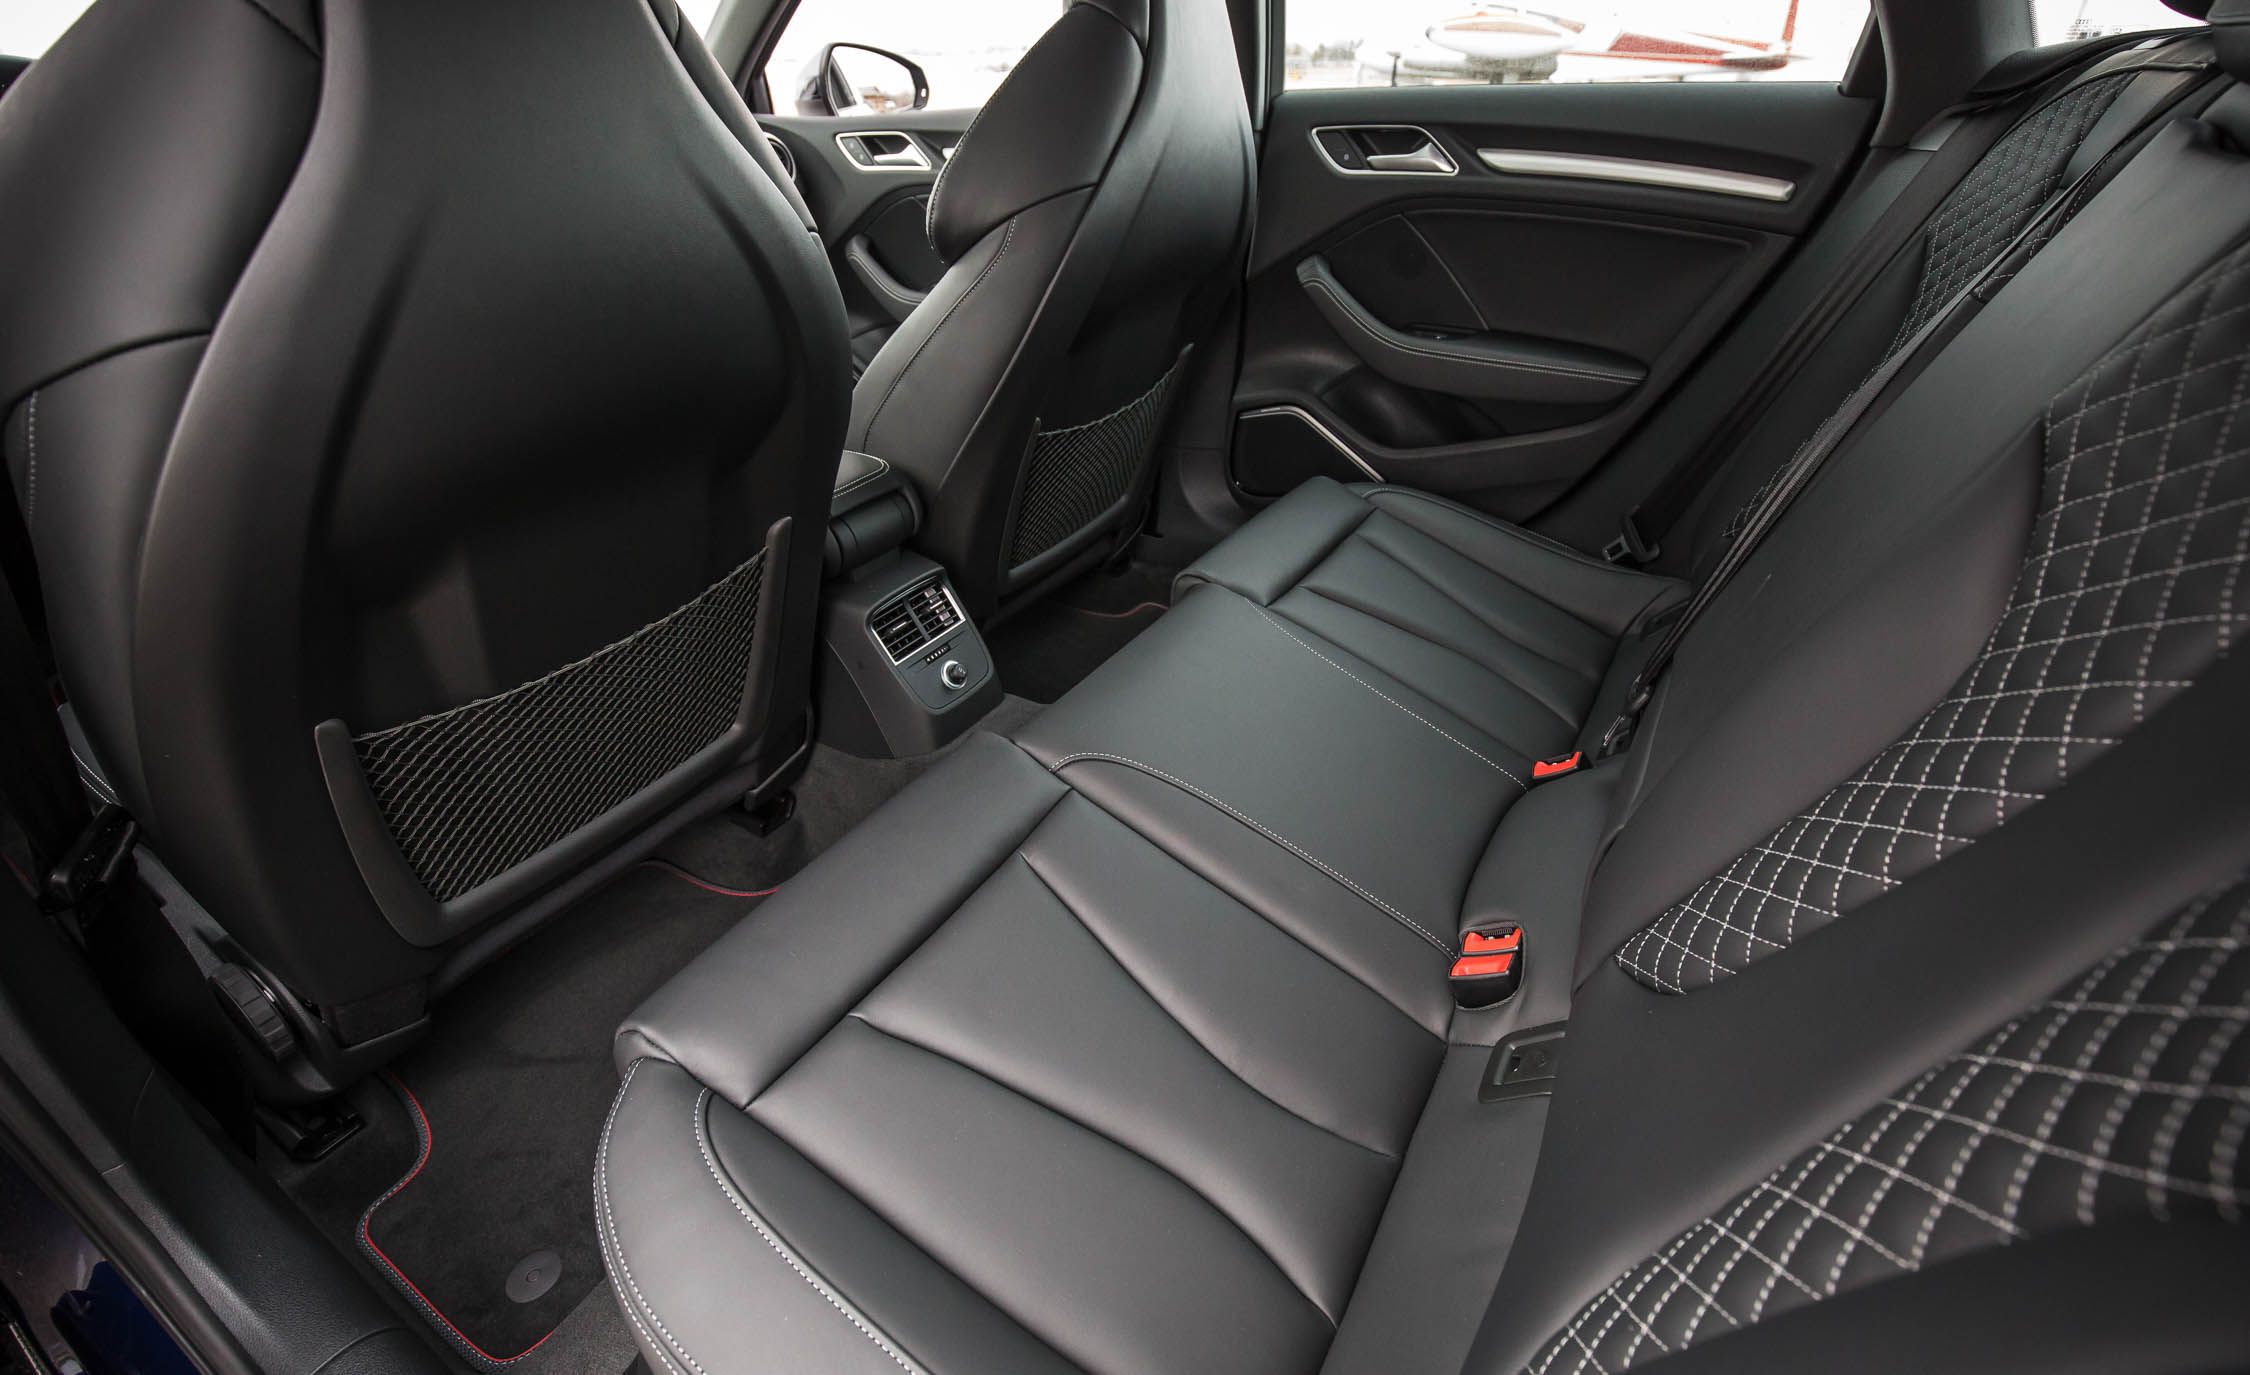 2017 Audi S3 Interior Seats Rear Space (View 28 of 50)